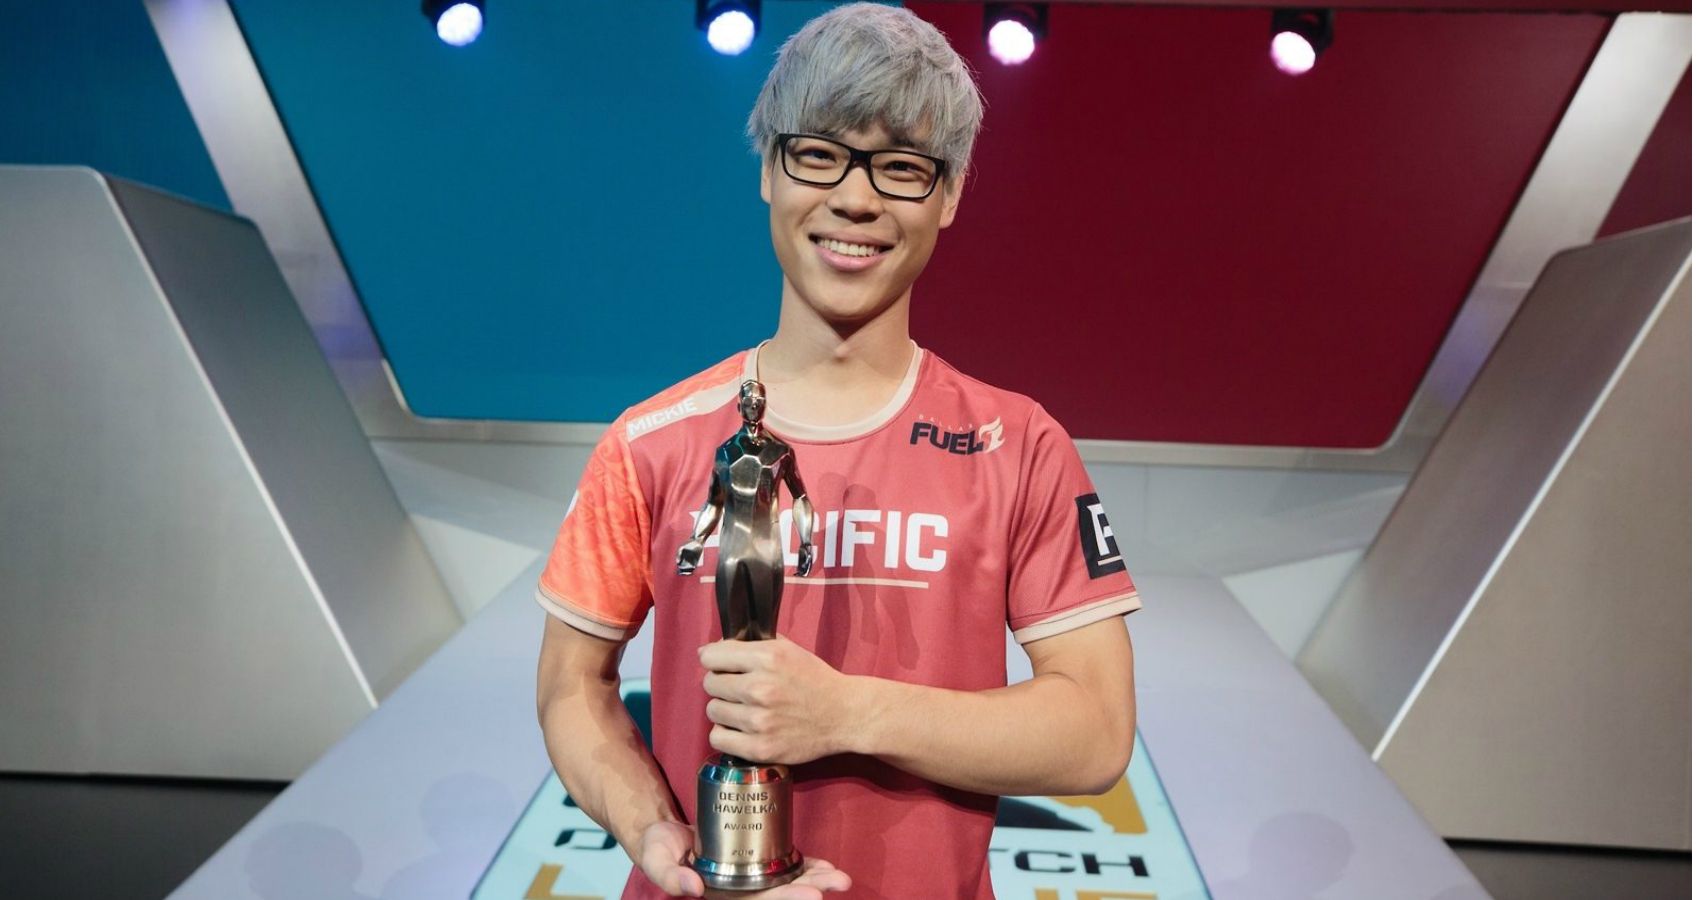 Overwatch League 2019 Adds Three New Categories To Their Season Awards